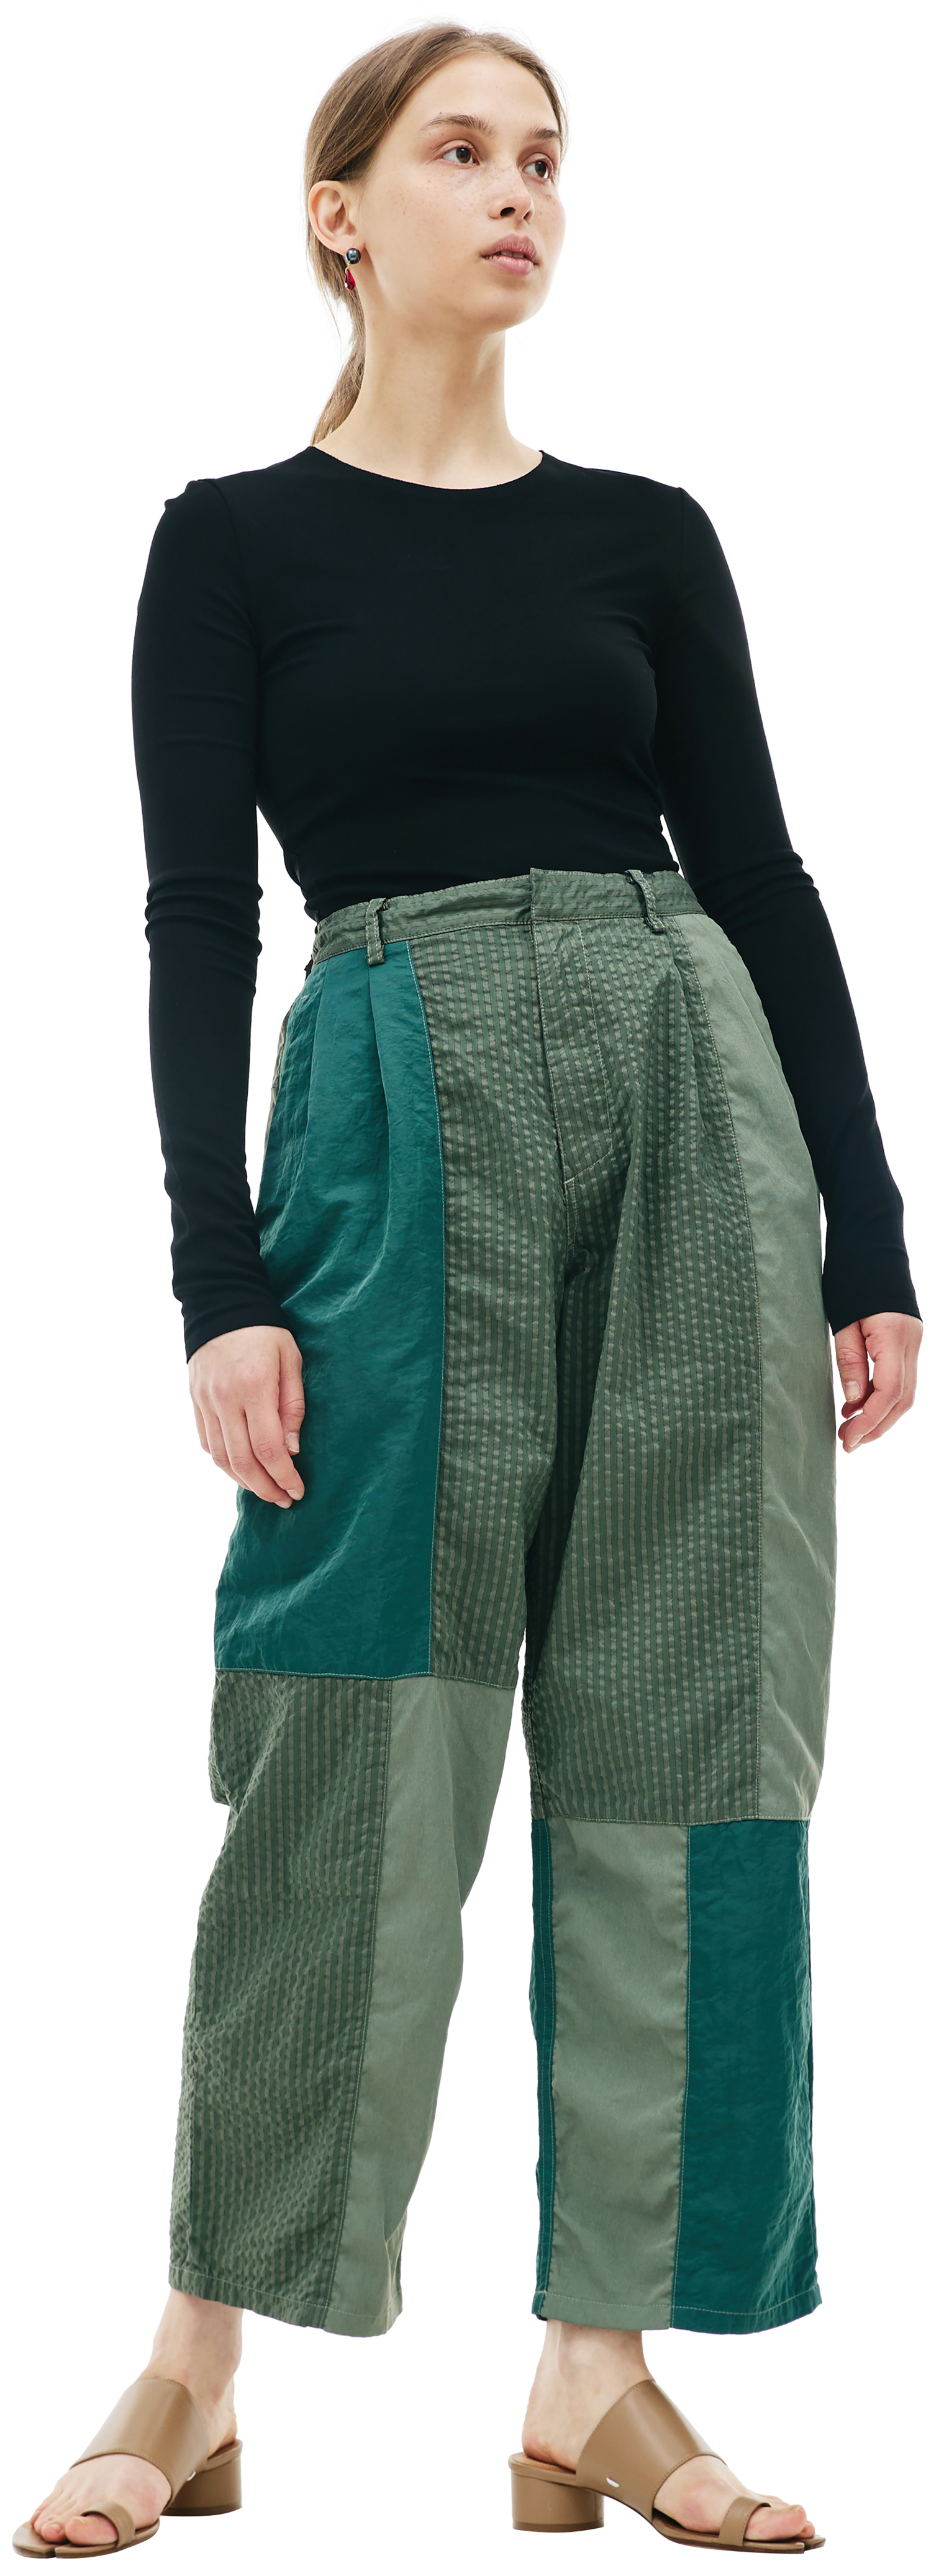 KIMMY Striped patchwork trousers